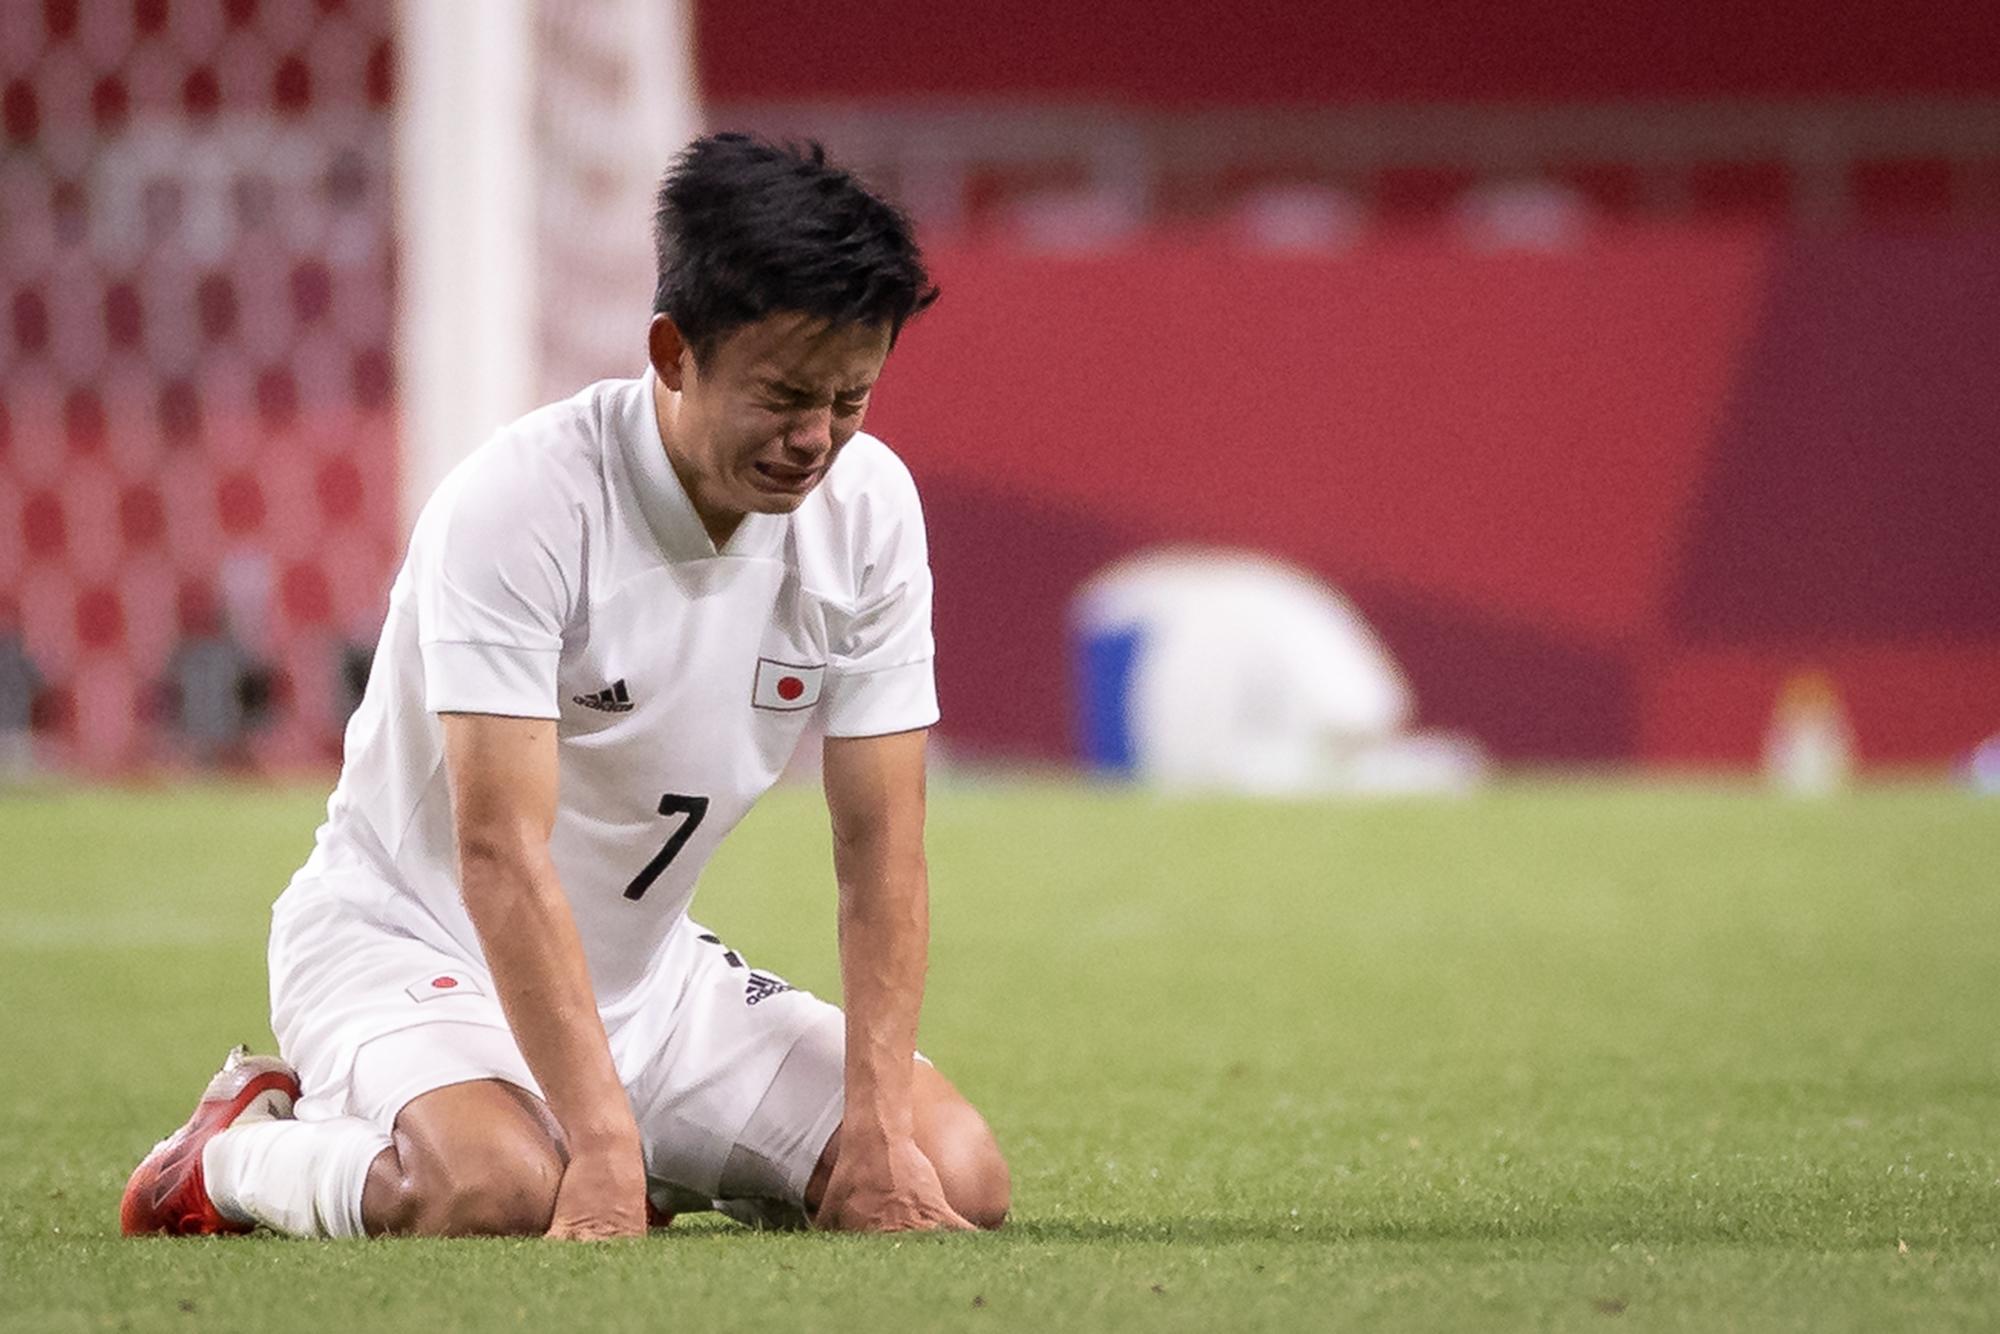 1628342399 The pain of Kubo the soccer star of Japan after